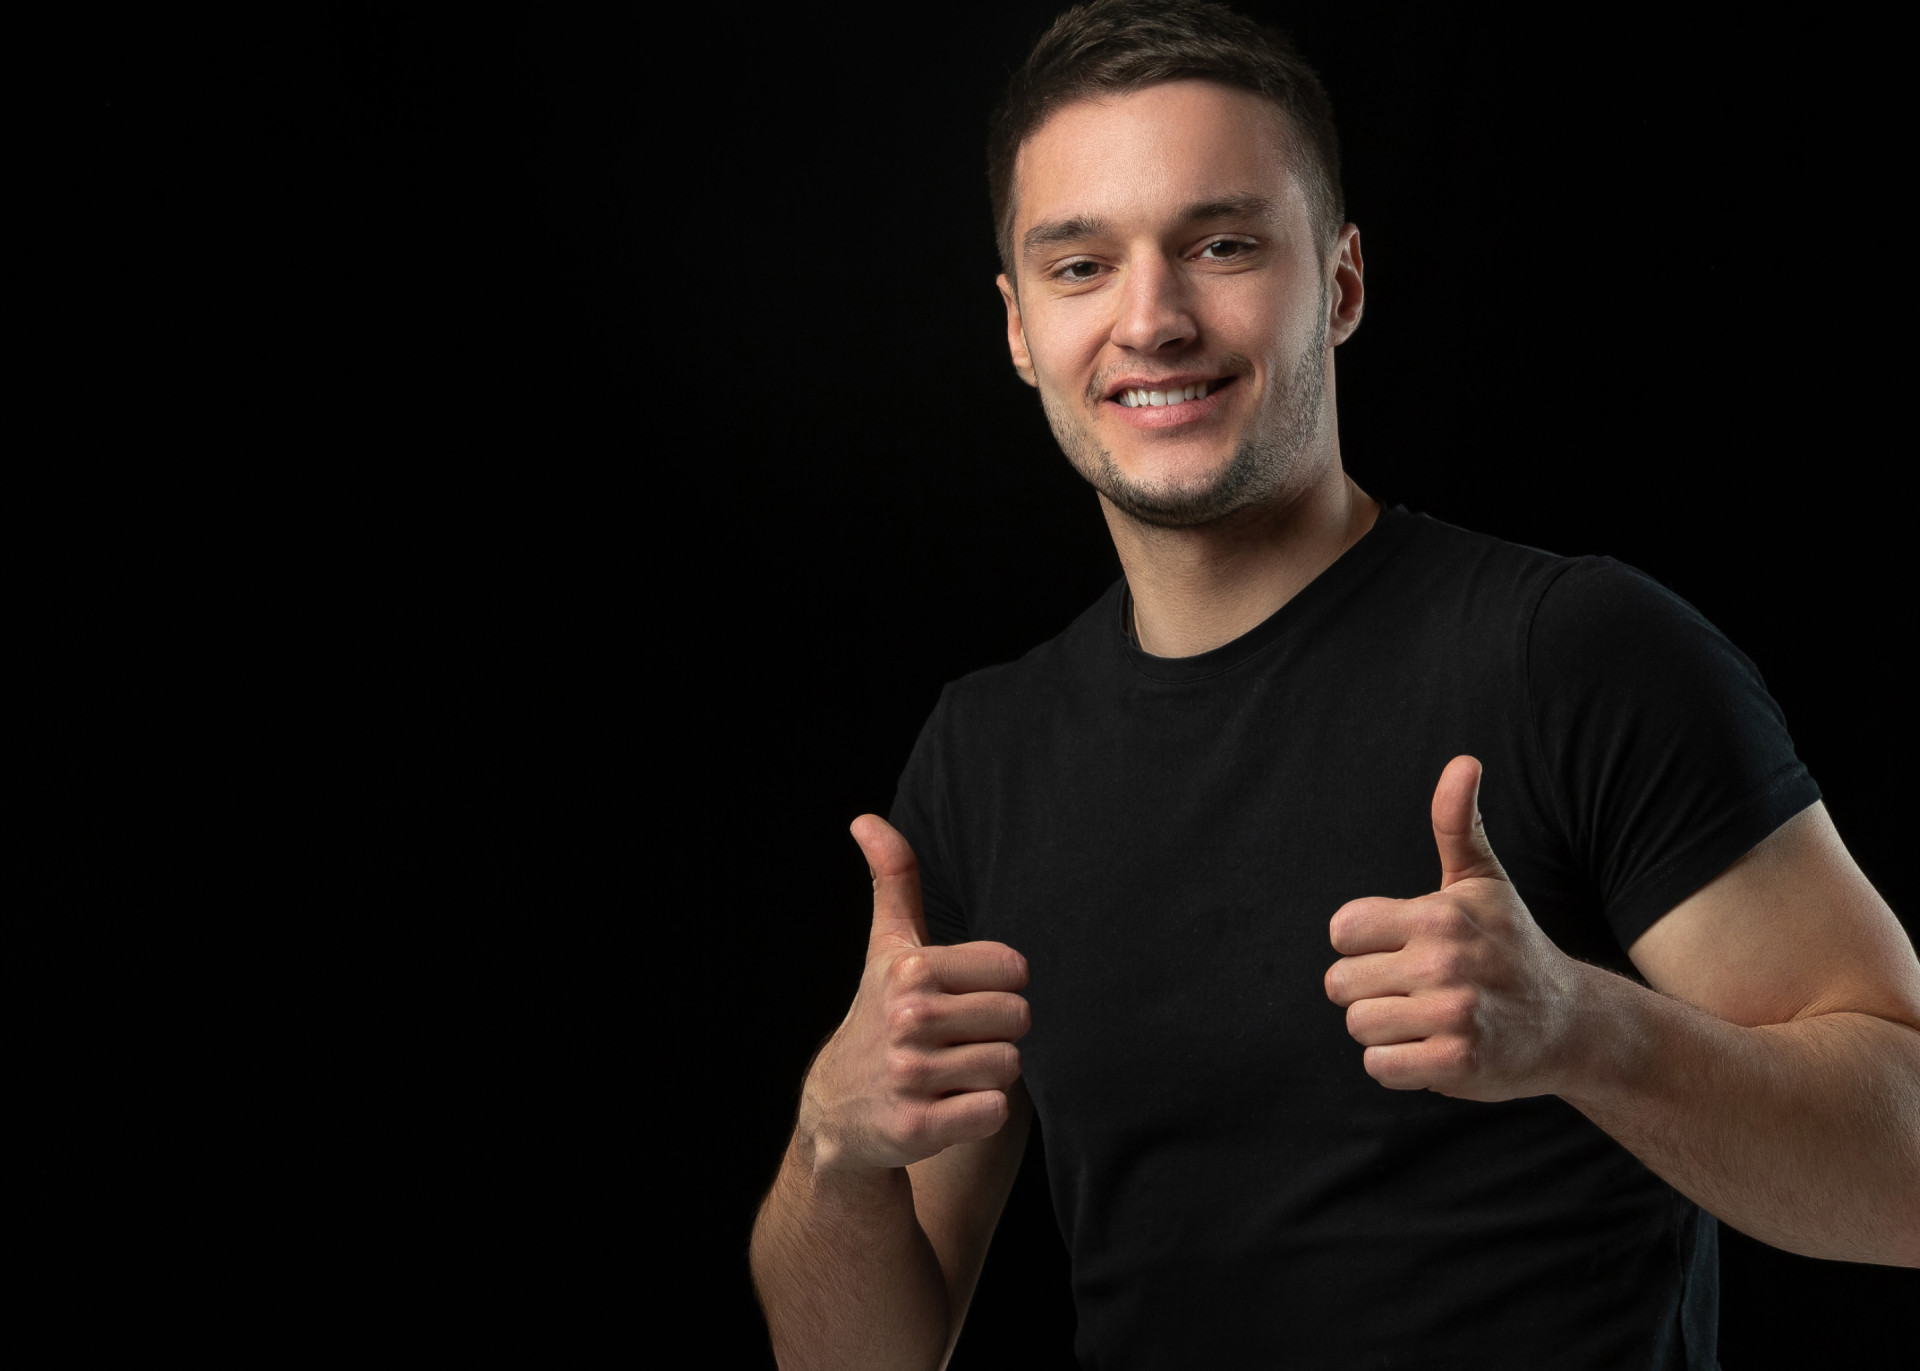 smiling-thumbs-up-monochrome-portrait-young-caucasian-man-isolated-black-studio-wall 1.jpg